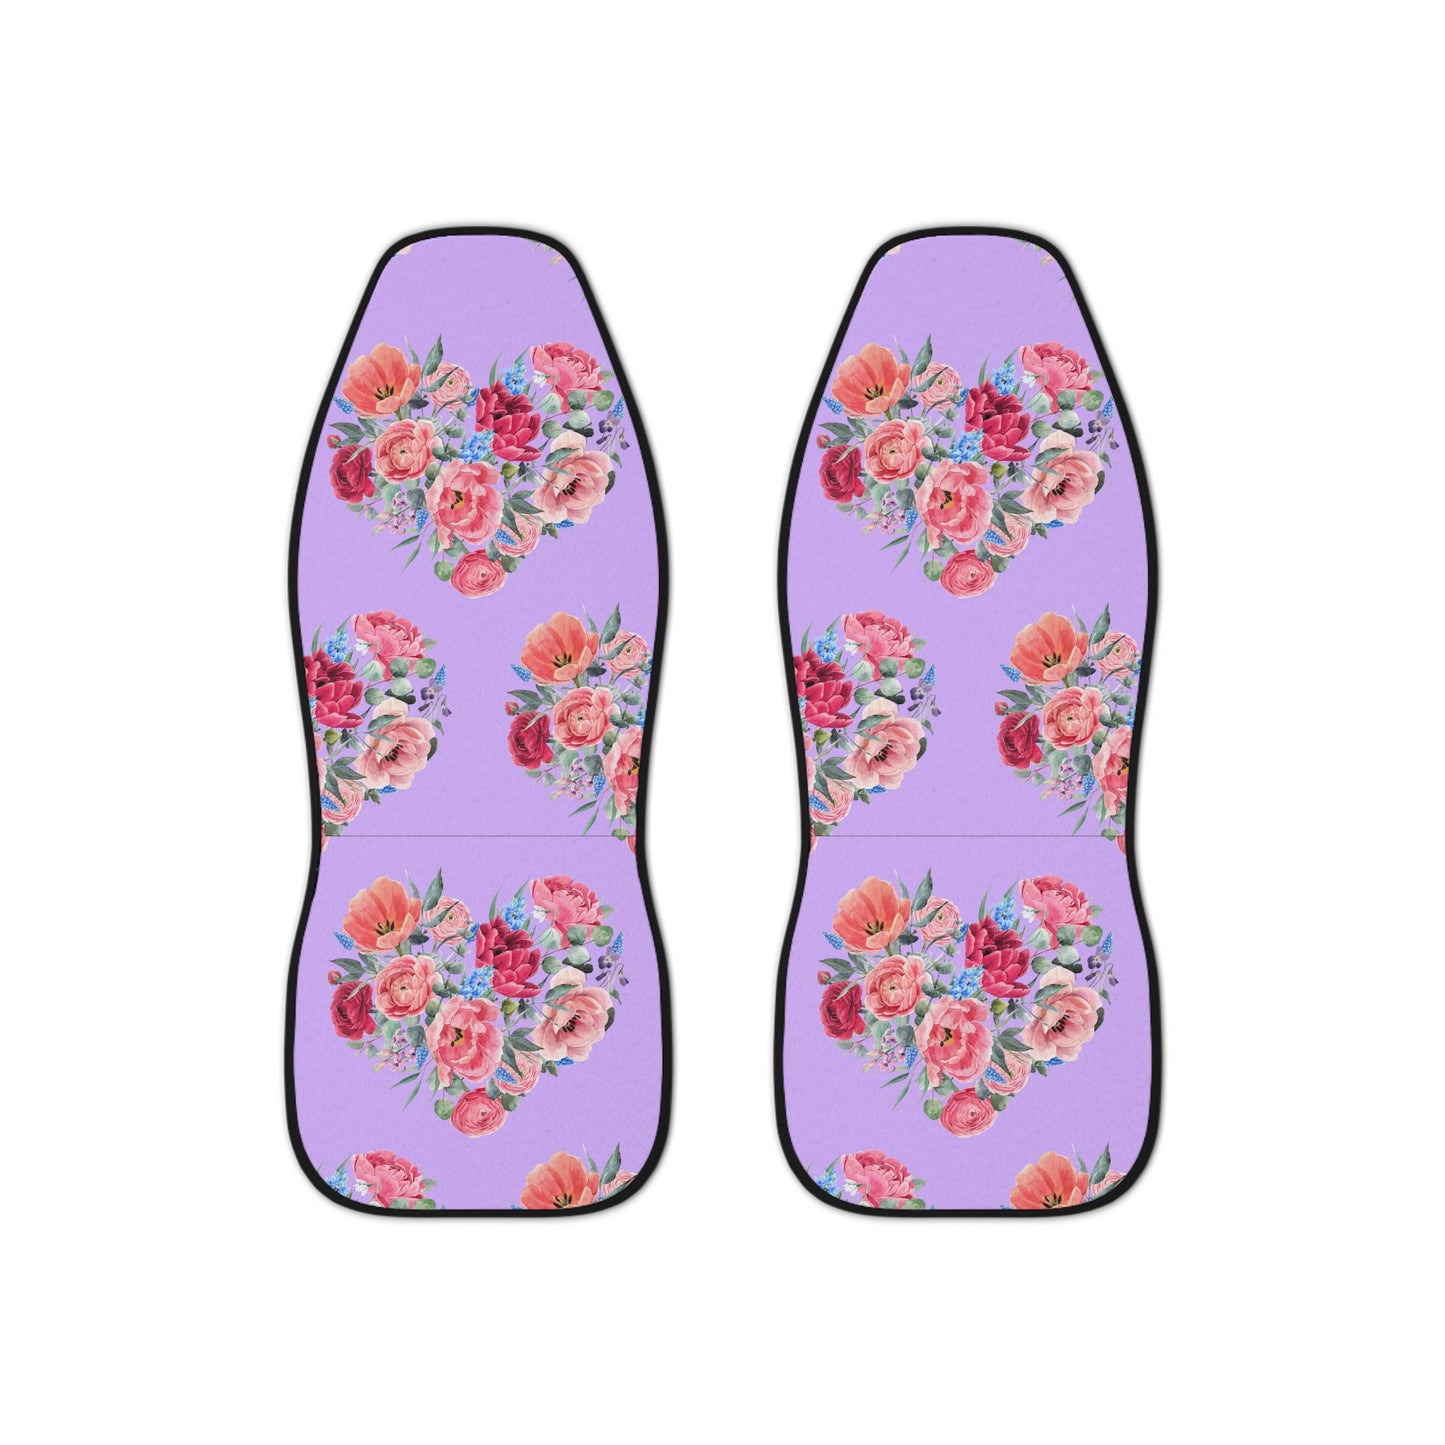 Pink & Blue Rose Heart on Purple Pattern Car Seat Covers